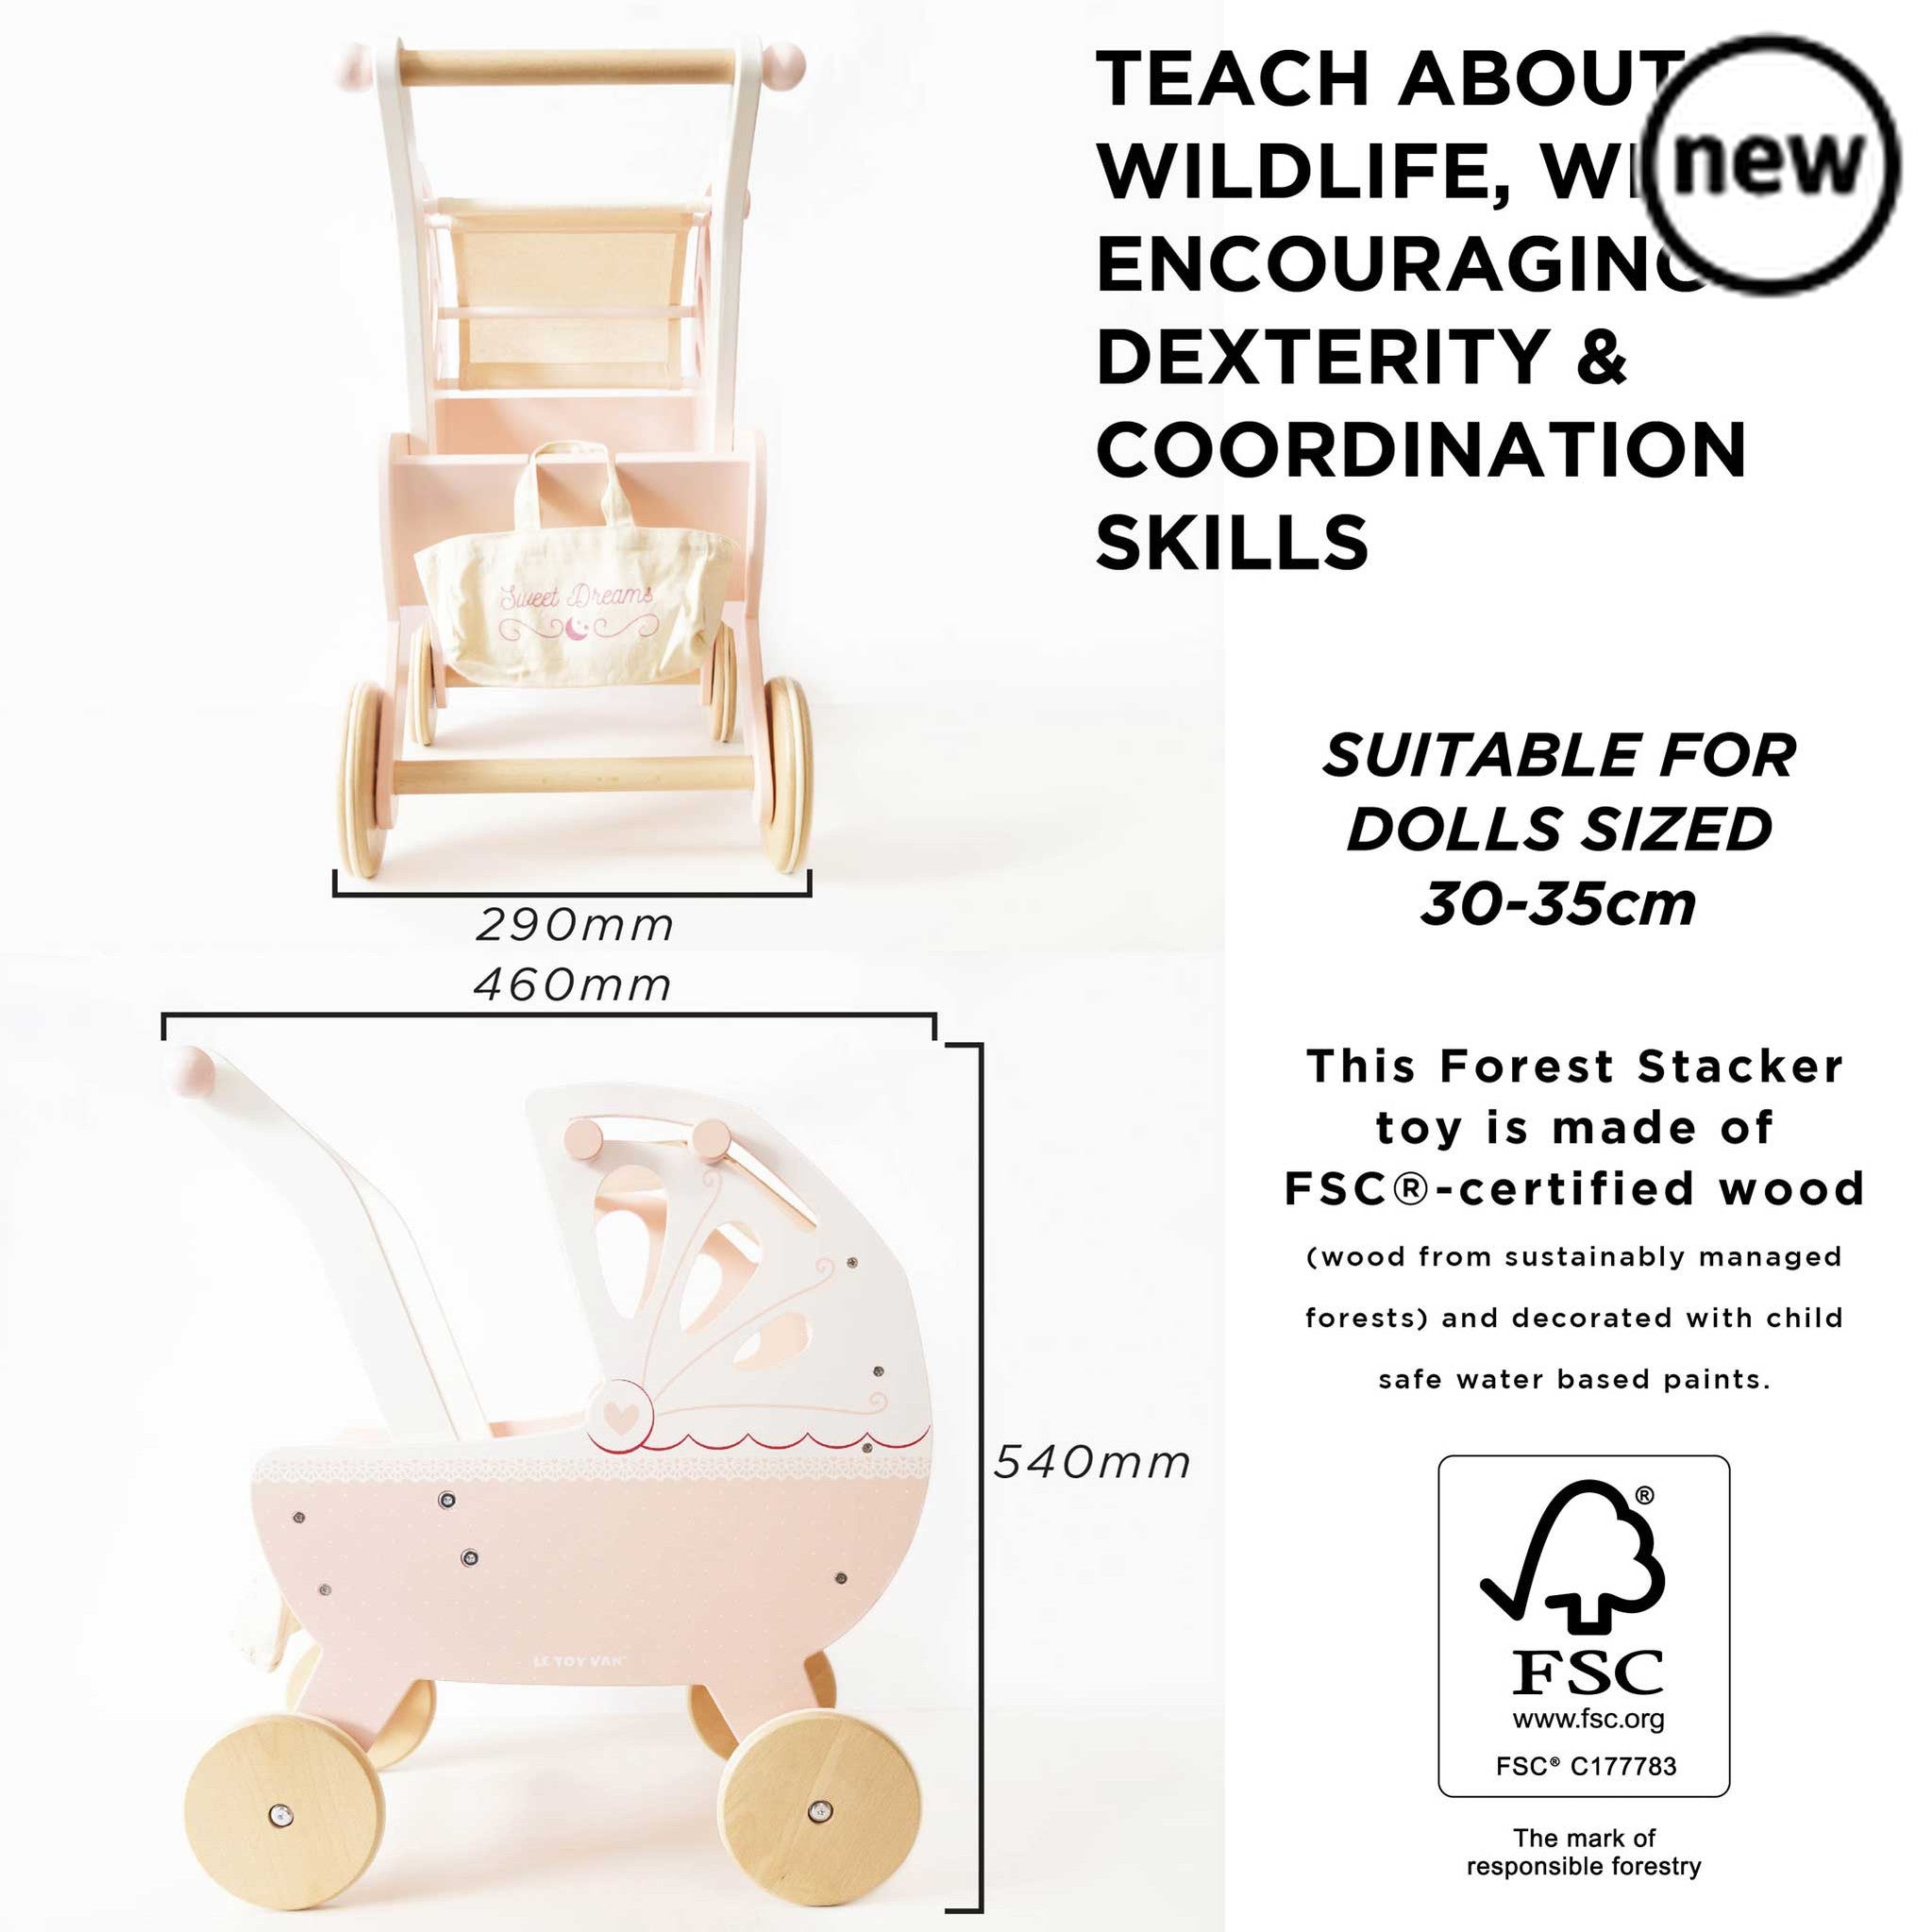 Sweet Dreams Doll Pram, Description Take dolly out and about on all their childhood adventures with our beautiful, traditional wooden doll pram stroller. Lovingly designed, this little beauty is full of nostalgia, adorned with prettiest, delicate detailing with heart and lace motifs. Featuring a soft pastel pink, cream and fresh white colour palette, it's strong structure, soft padded mattress and unique retractable hand-sewn canopy makes it the perfect pram to take soft toys and dolls out in style. Crafted